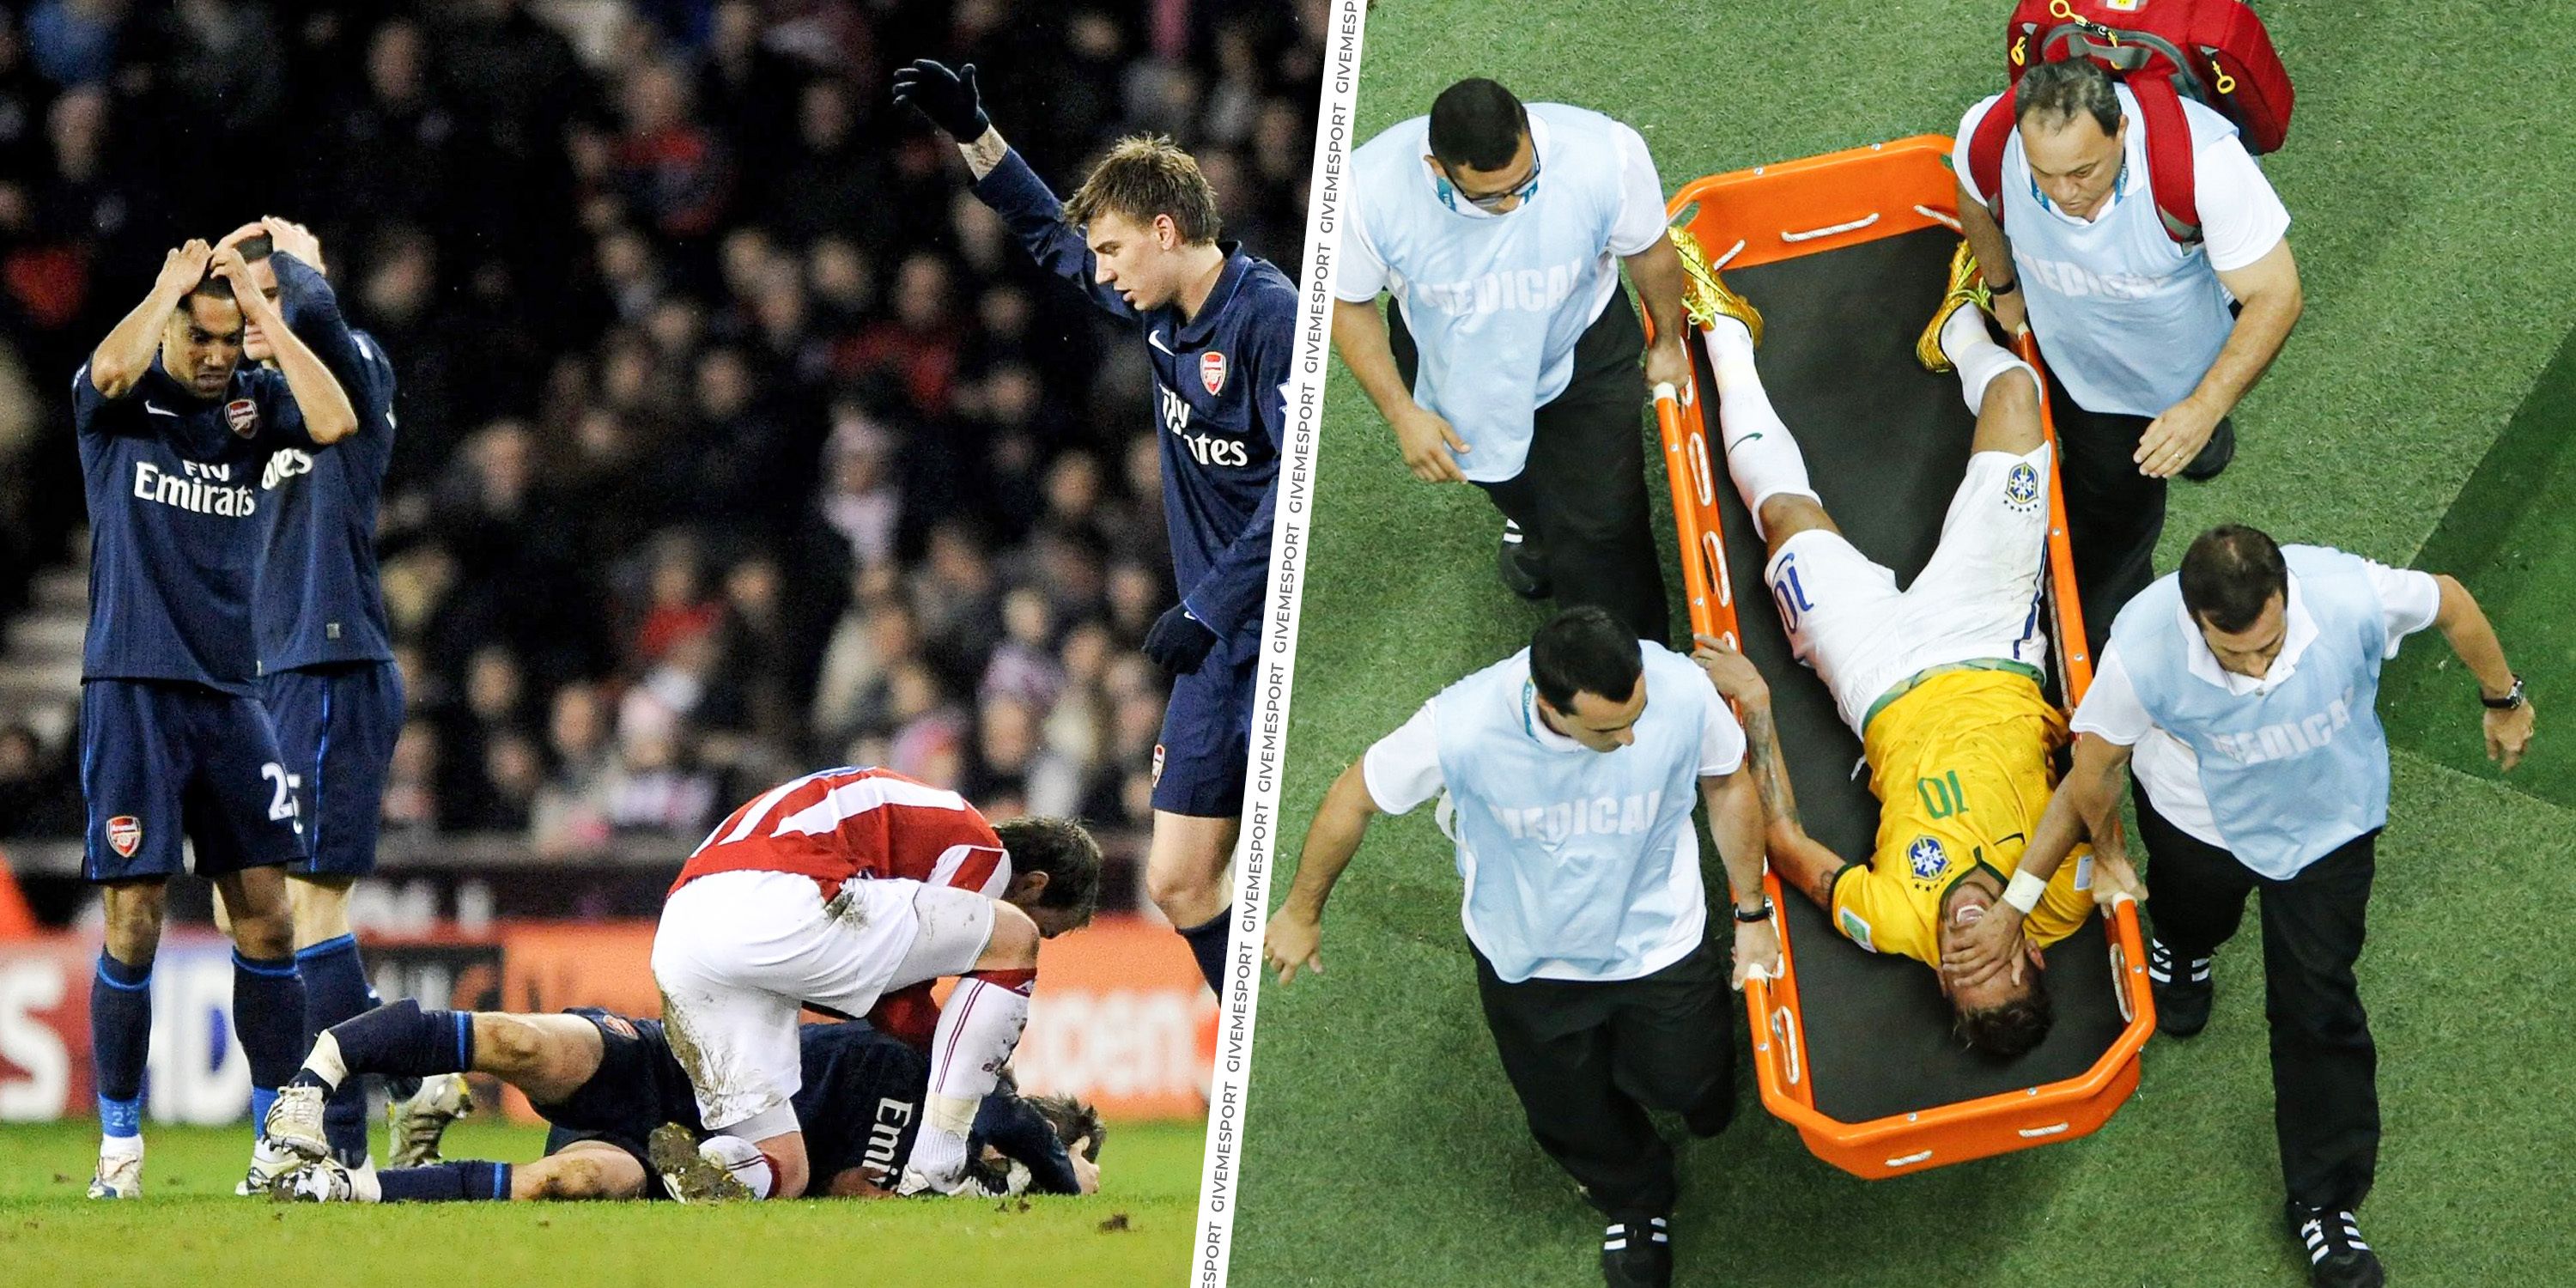 Aaron Ramsay (left) and Neymar (right) suffering injuries in football.